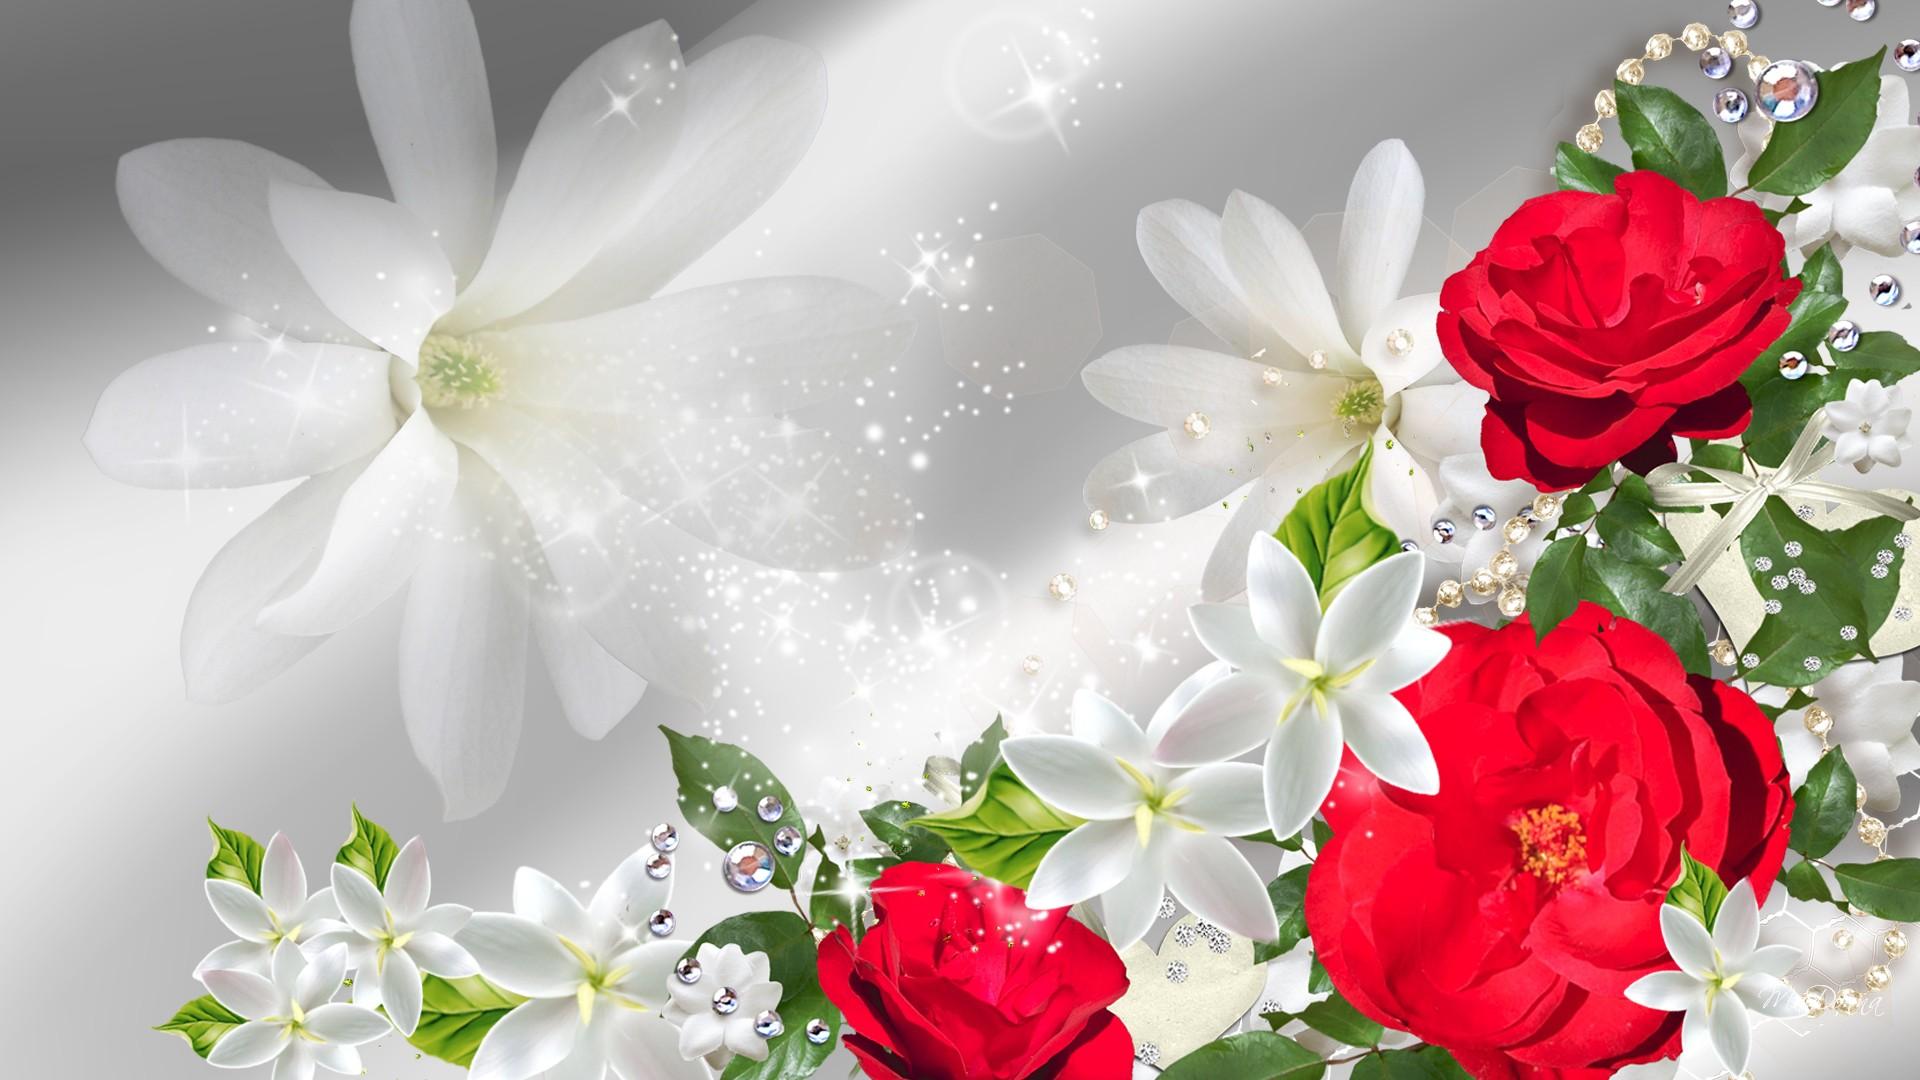 Red Roses On Display >> HD Wallpaper, get it now!